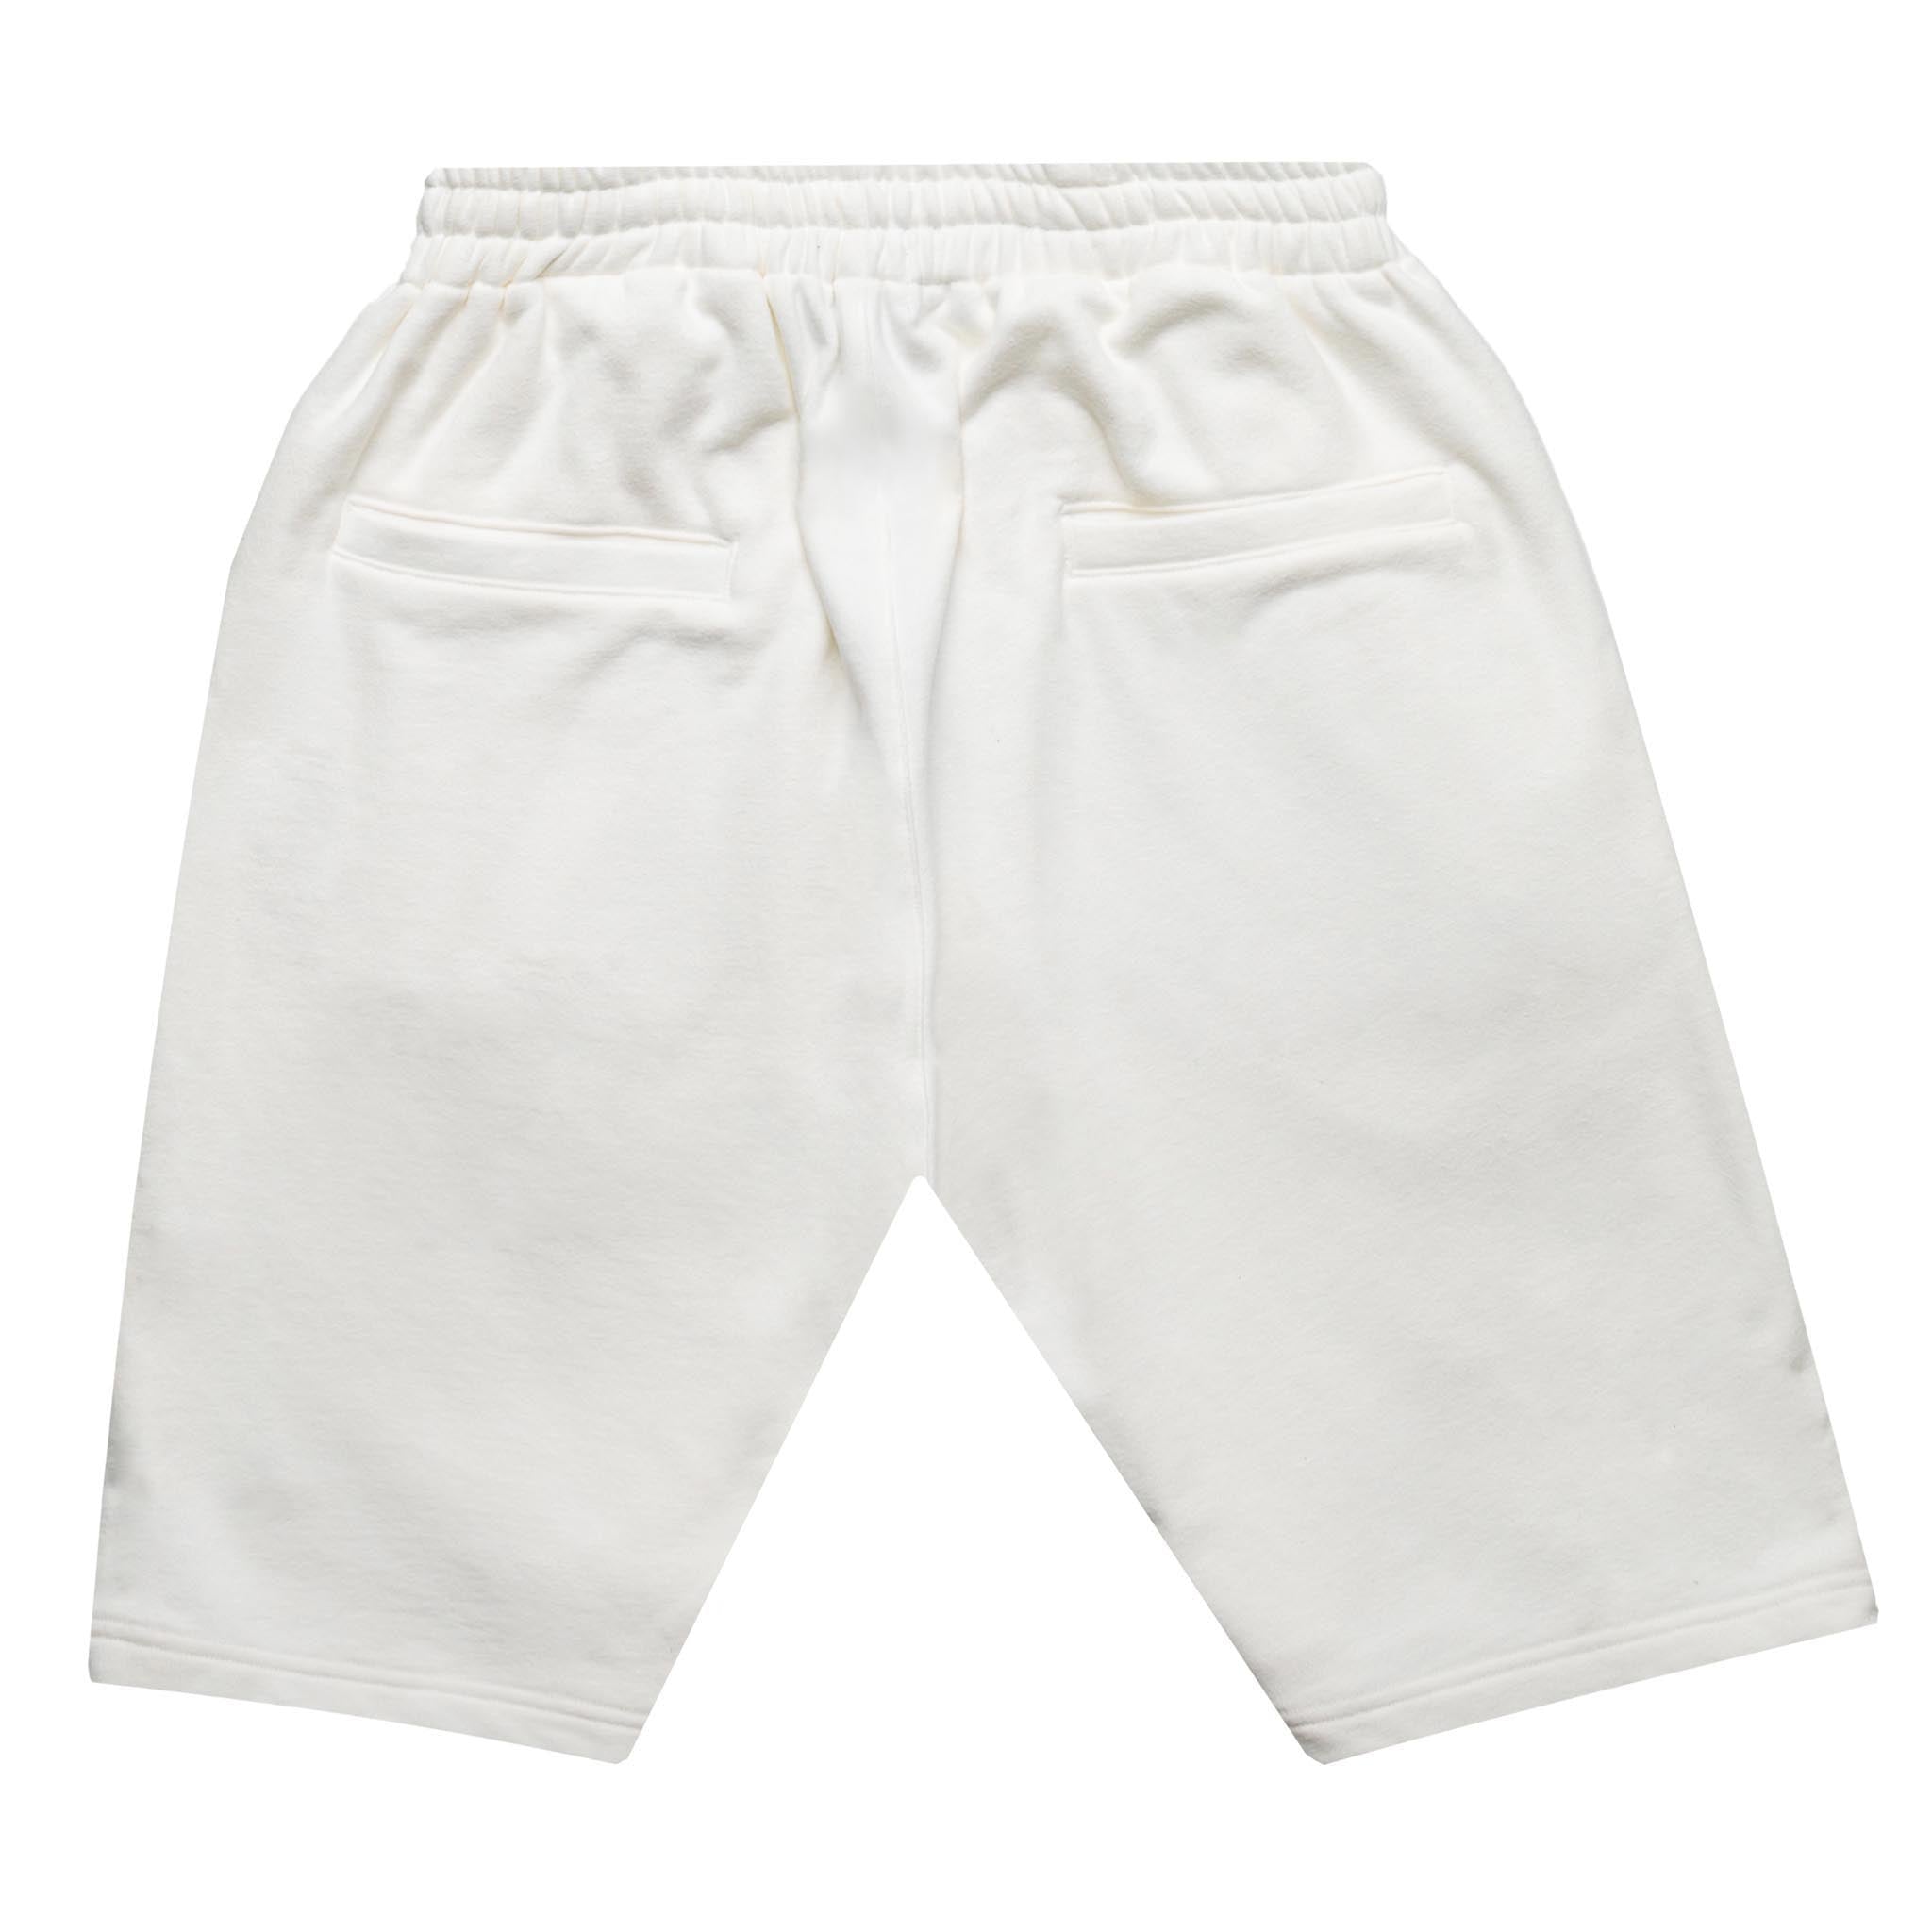 HOMME+ Rubber Patch Shorts White